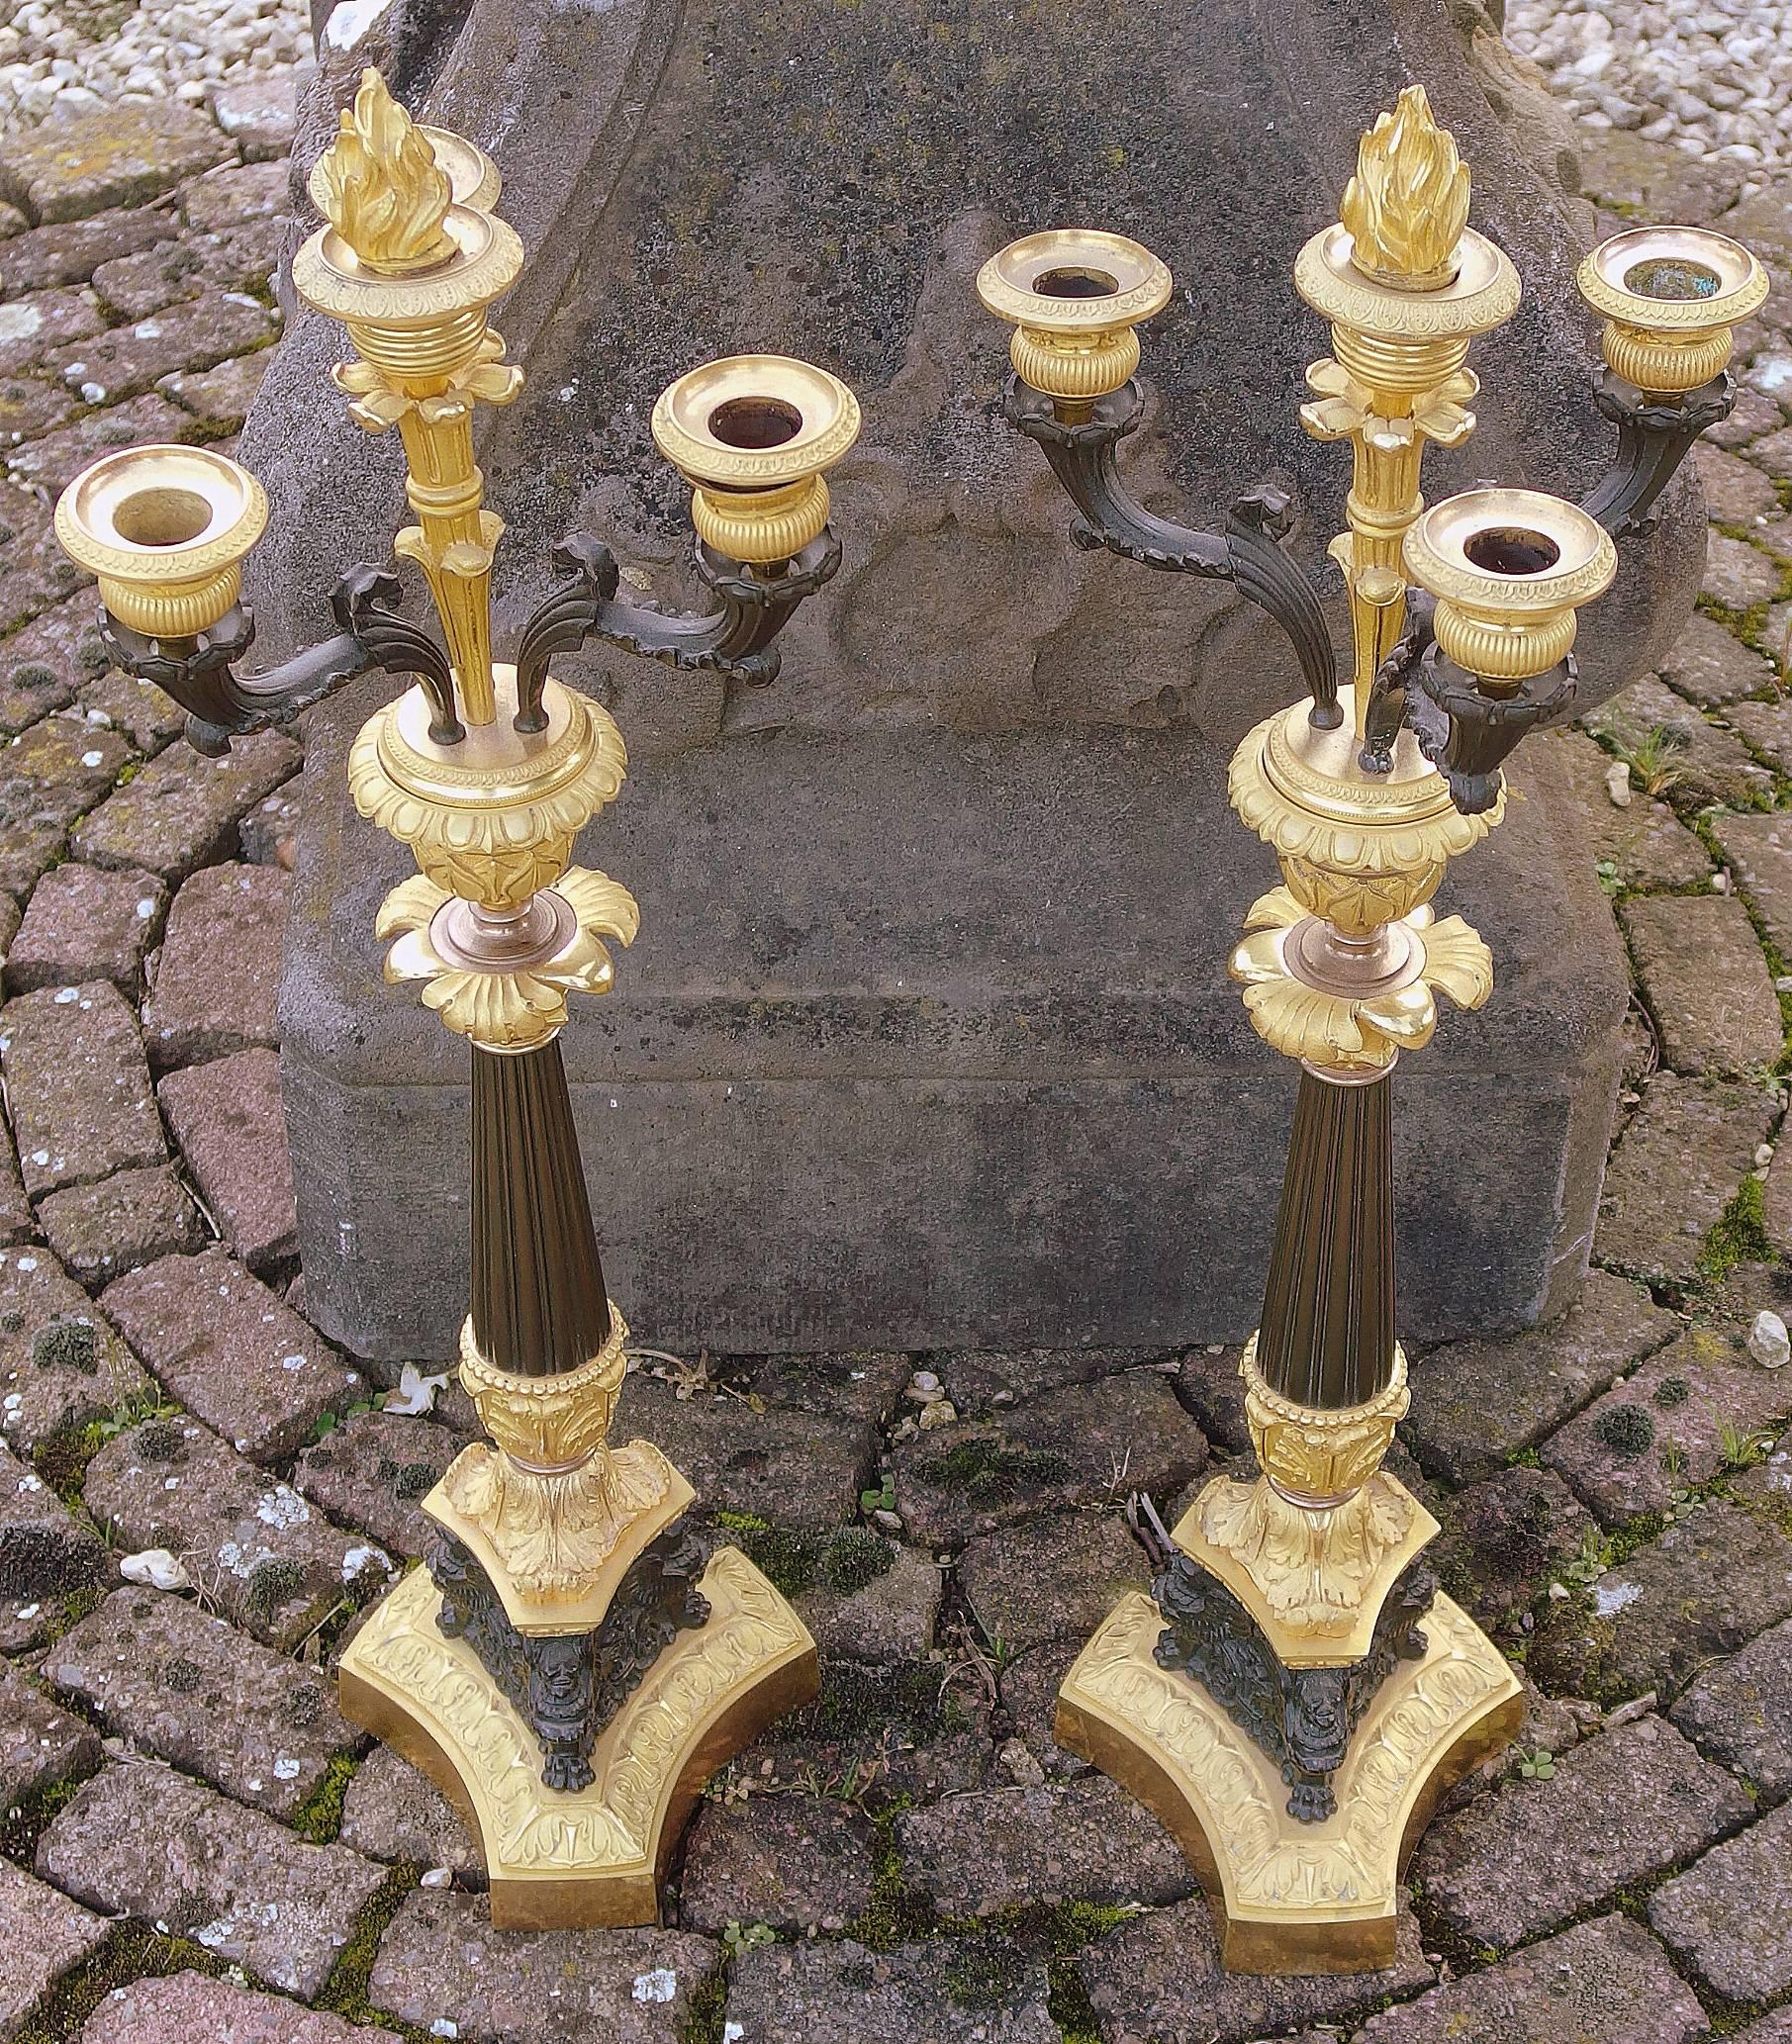 A pair of Ormolu and Patinated Bronze Candelabra in the Louis Philippe style, made in France around 1830. The candelabra each have four candleholders. On an octagonal base, each candelabra has a removable flame cap in the socket of the upper